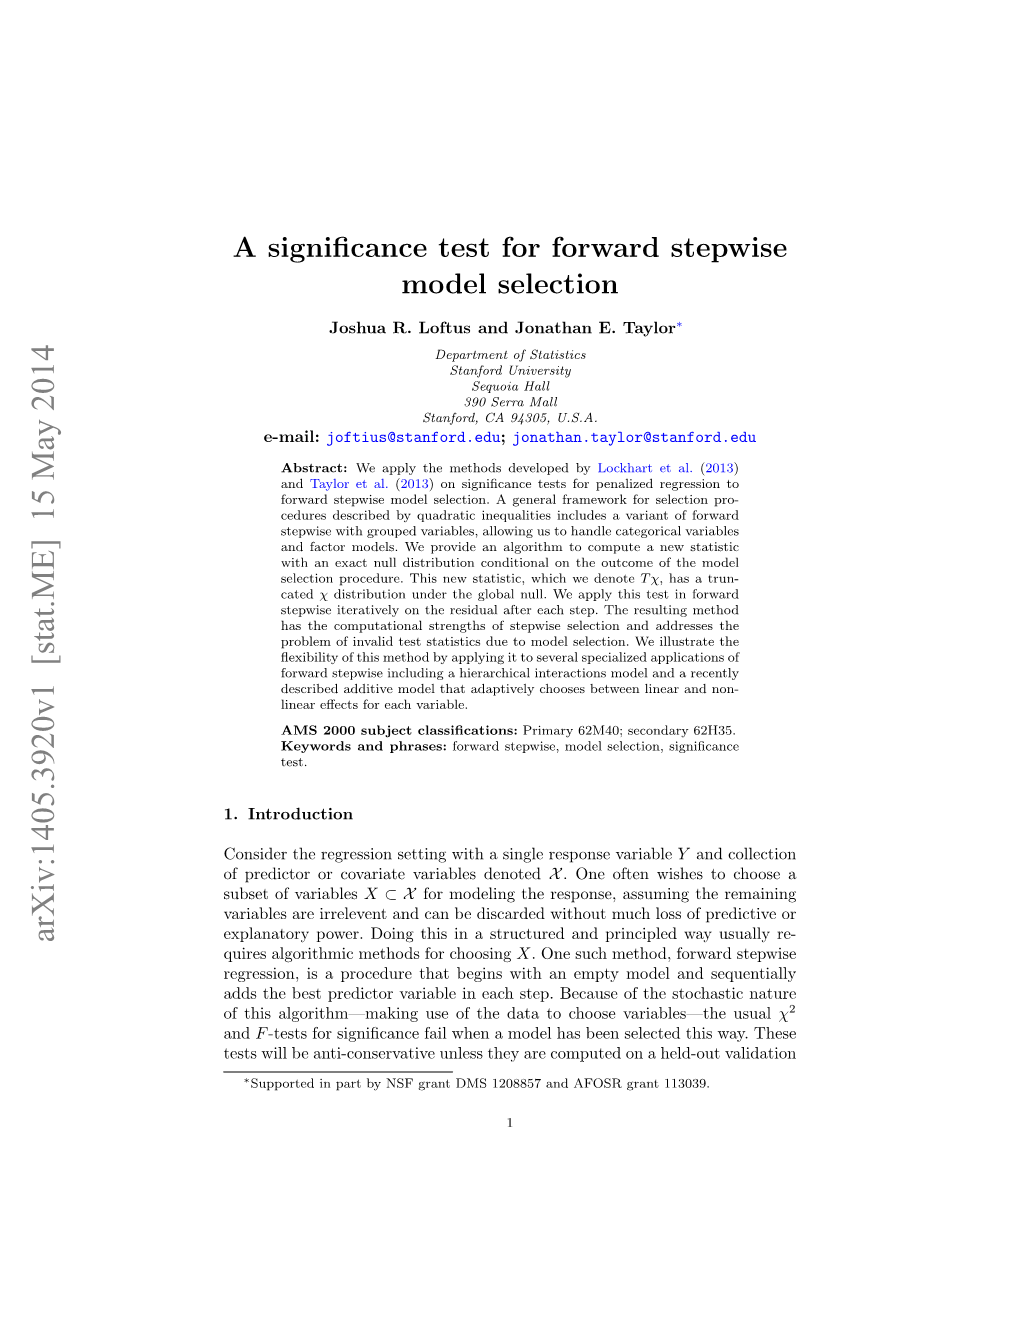 A Significance Test for Forward Stepwise Model Selection